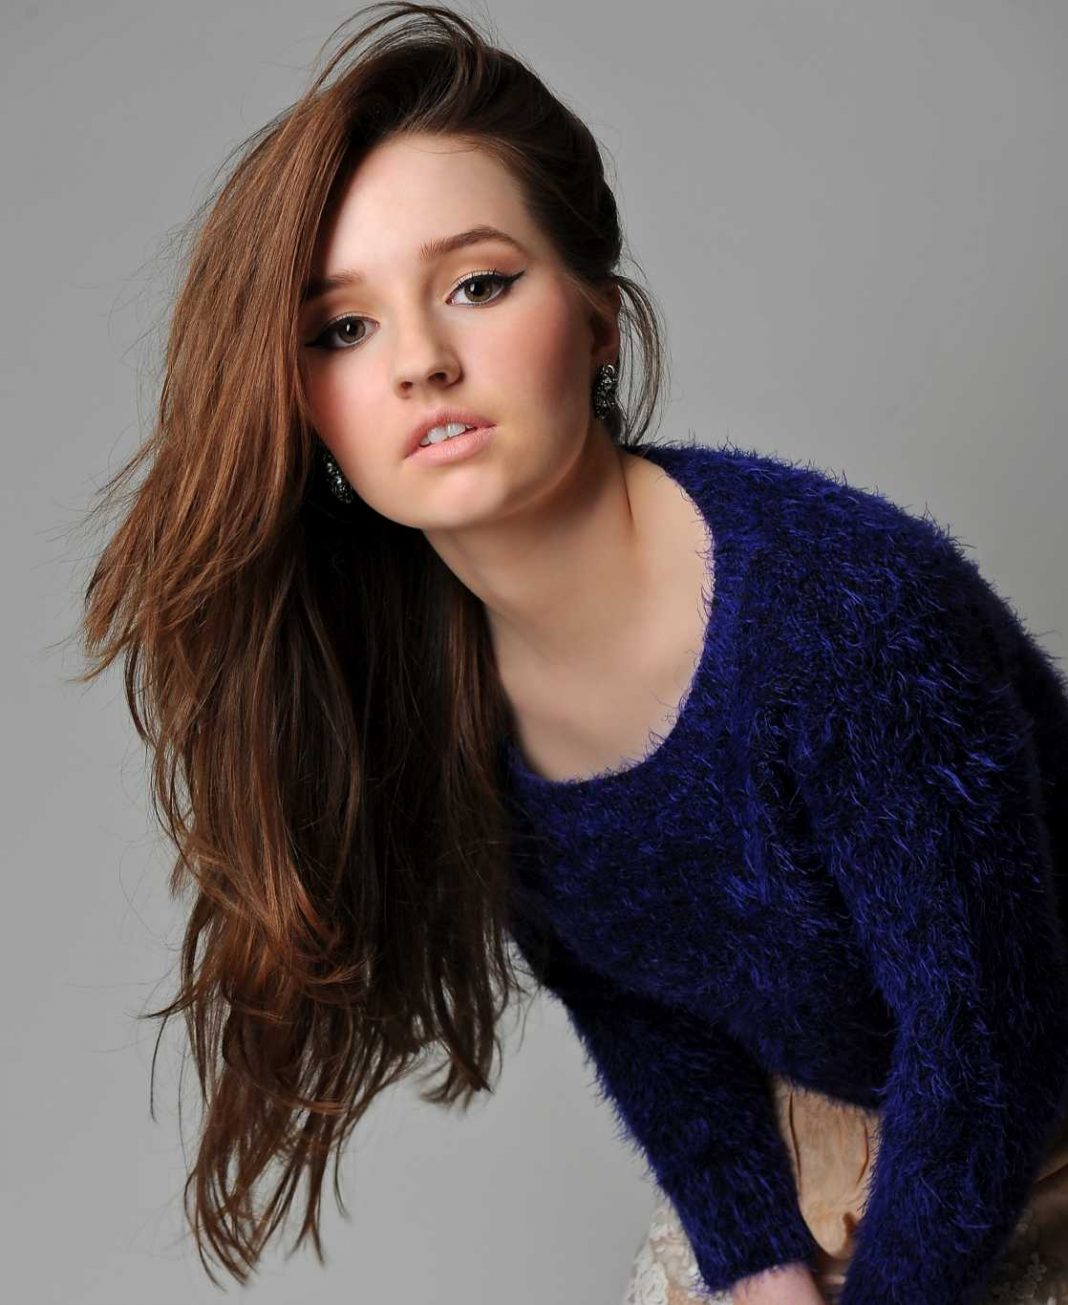 41 kaitlyn dever Nude Pictures Which Will Make You Give Up To Her Inexplicable Beauty 30